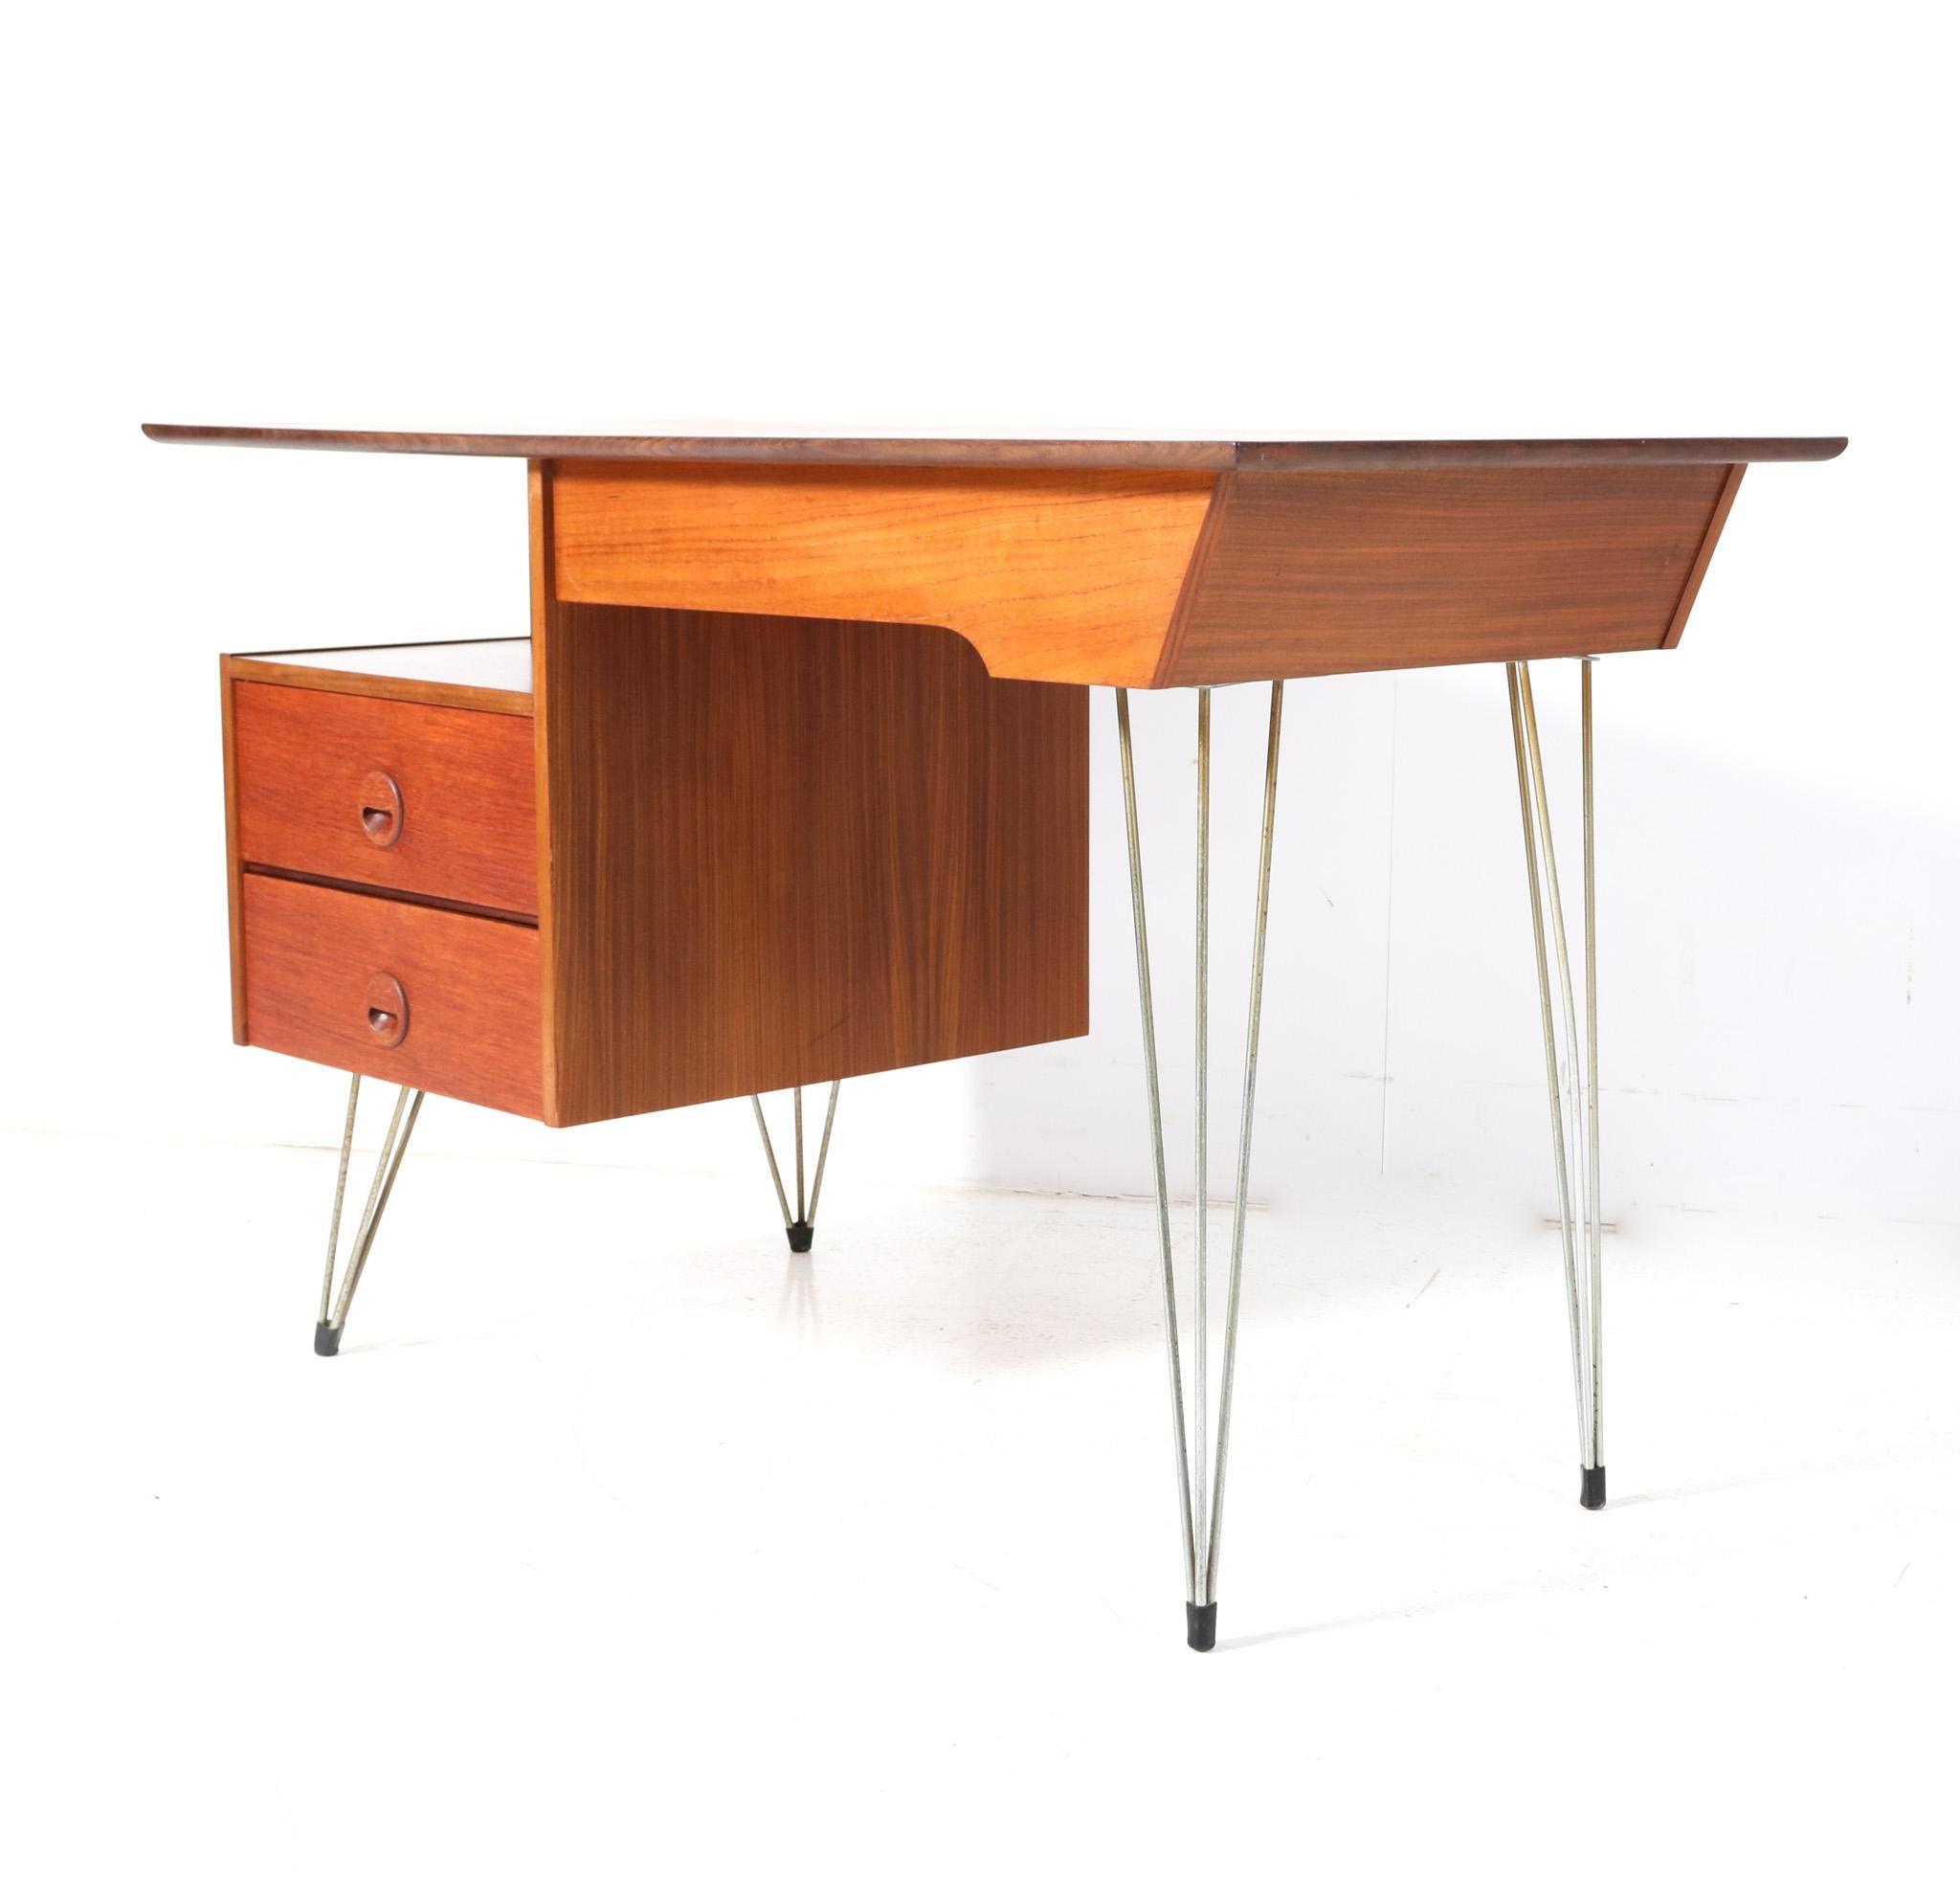  Mid-Century Modern Teak  Desk or Writing Table by Louis van Teeffelen for WéBé In Good Condition For Sale In Amsterdam, NL